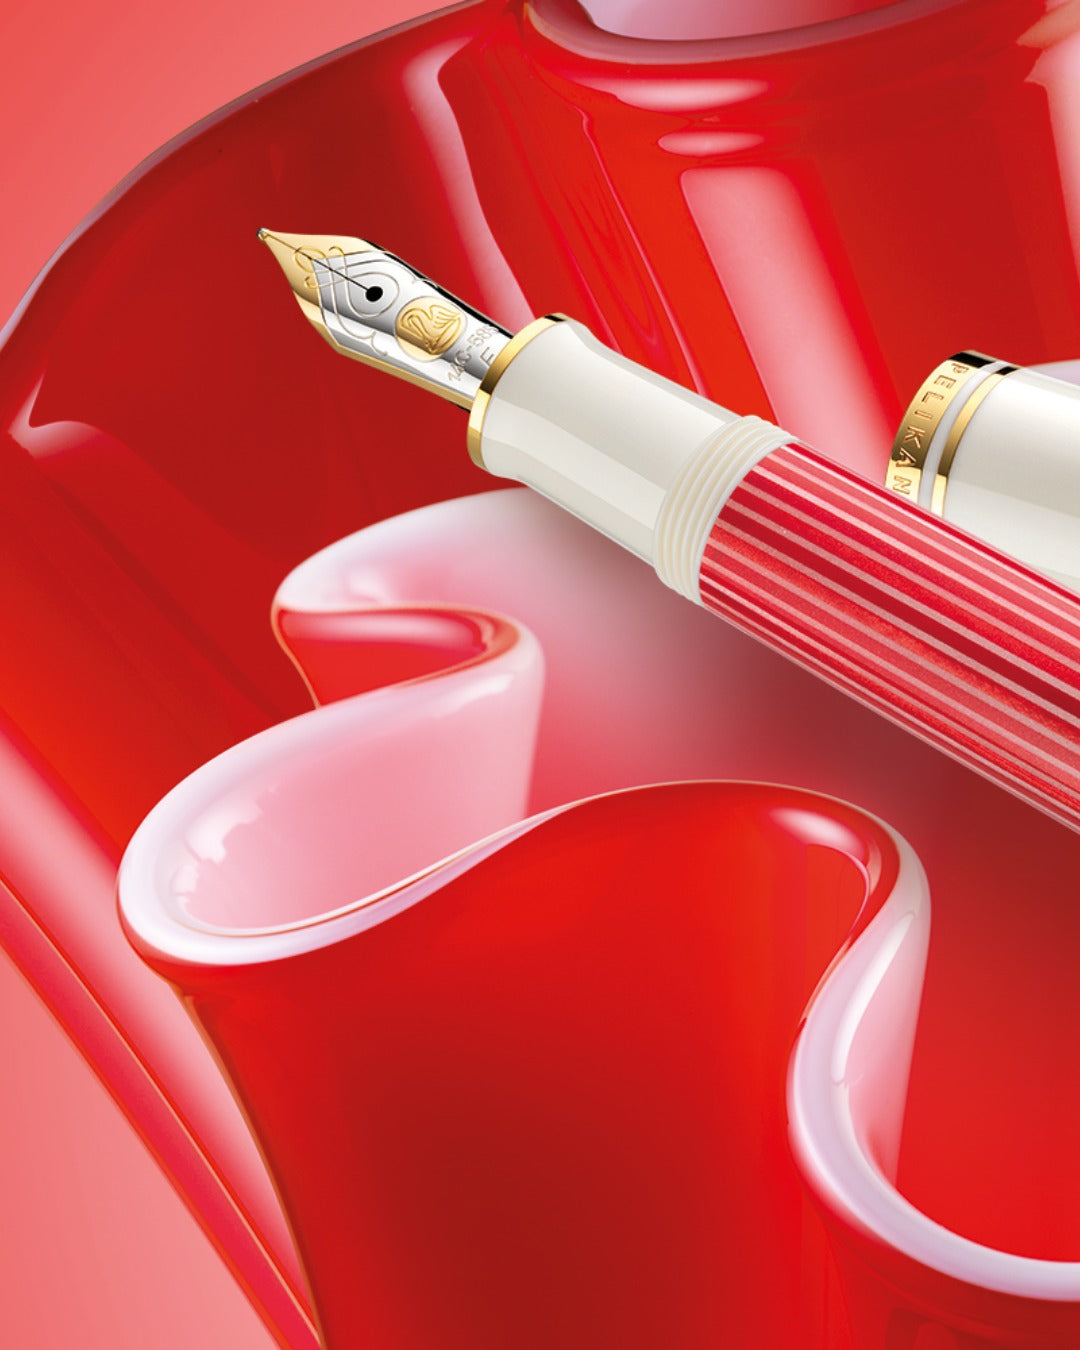 Pelikan Souverän M600 Red and White Fountain Pen - Pencraft the boutique